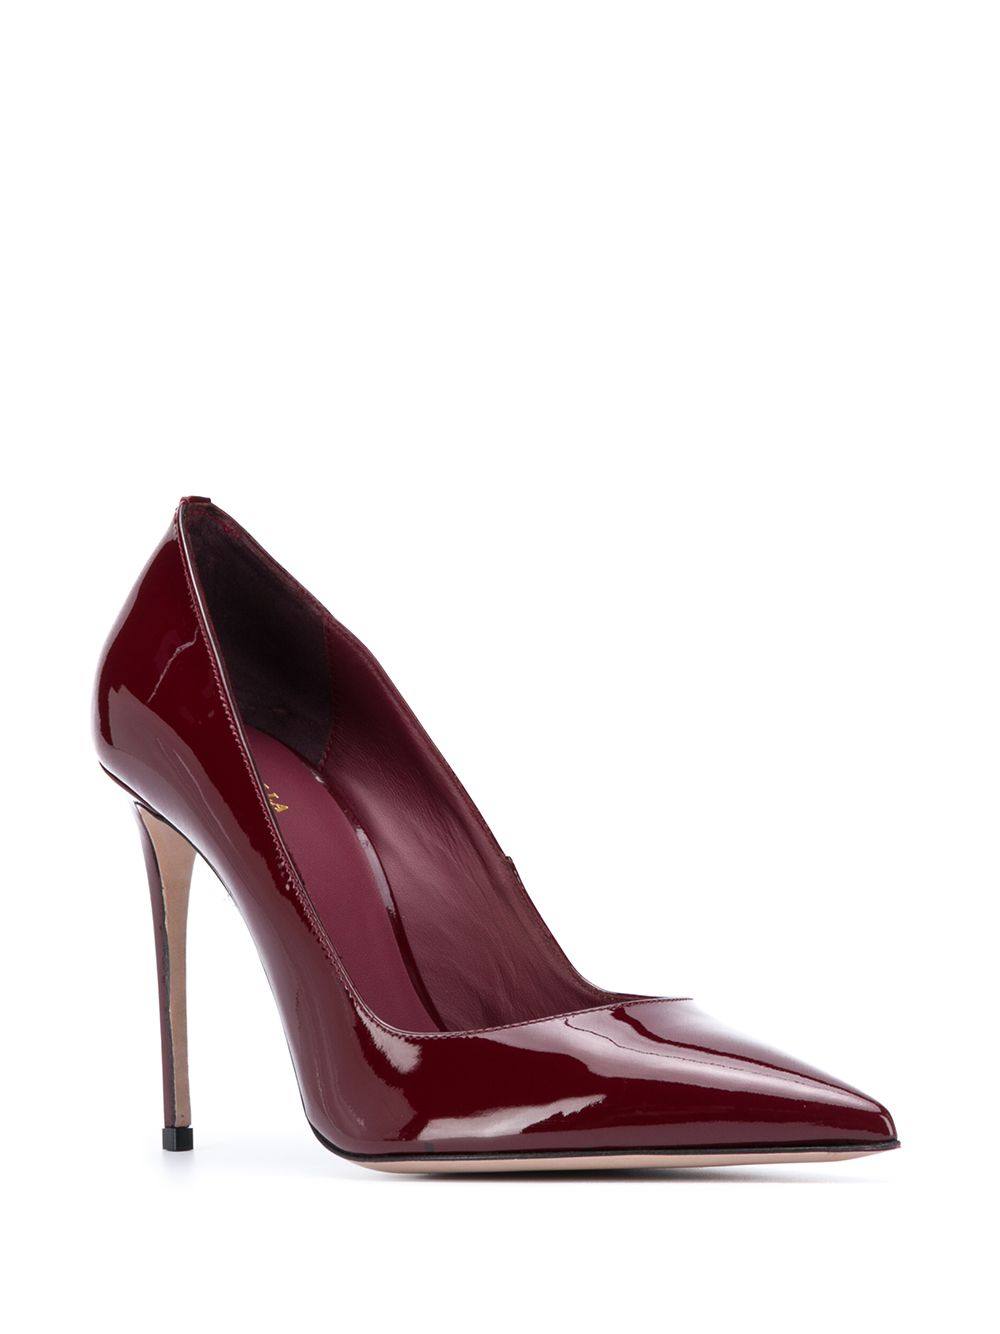 LE SILLA PATENT LEATHER HIGH HEELS